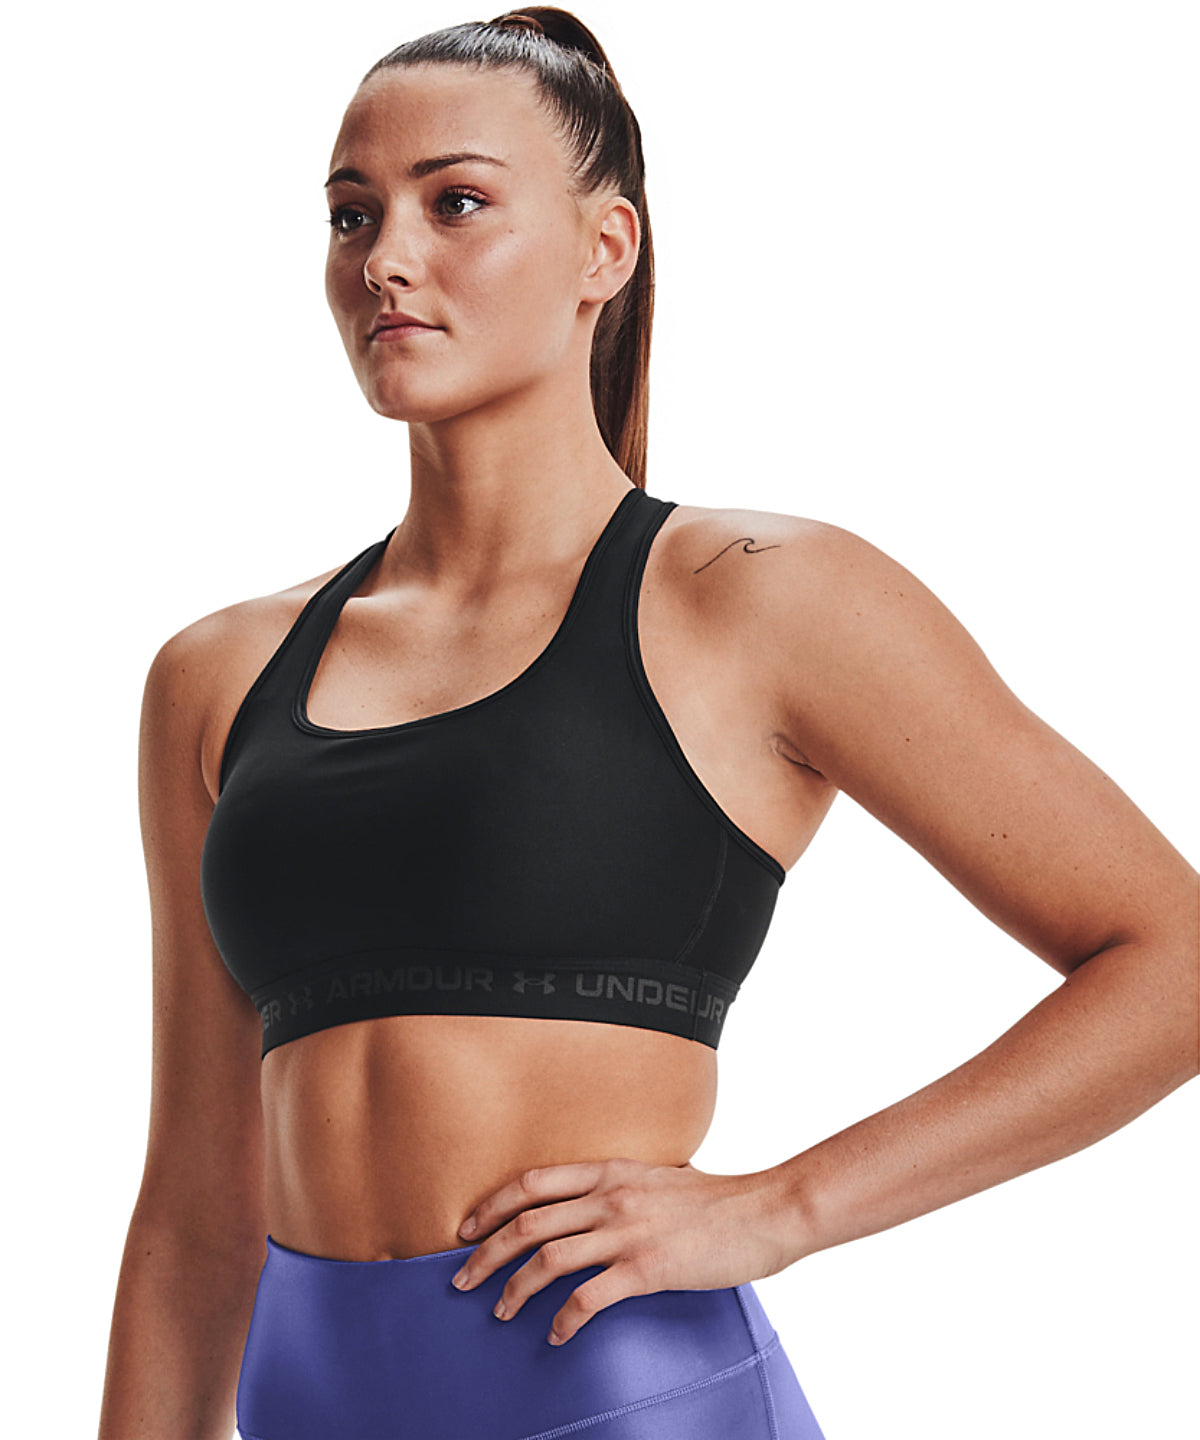  Under Armour Women's Armour Mid Reversible Sports Bra